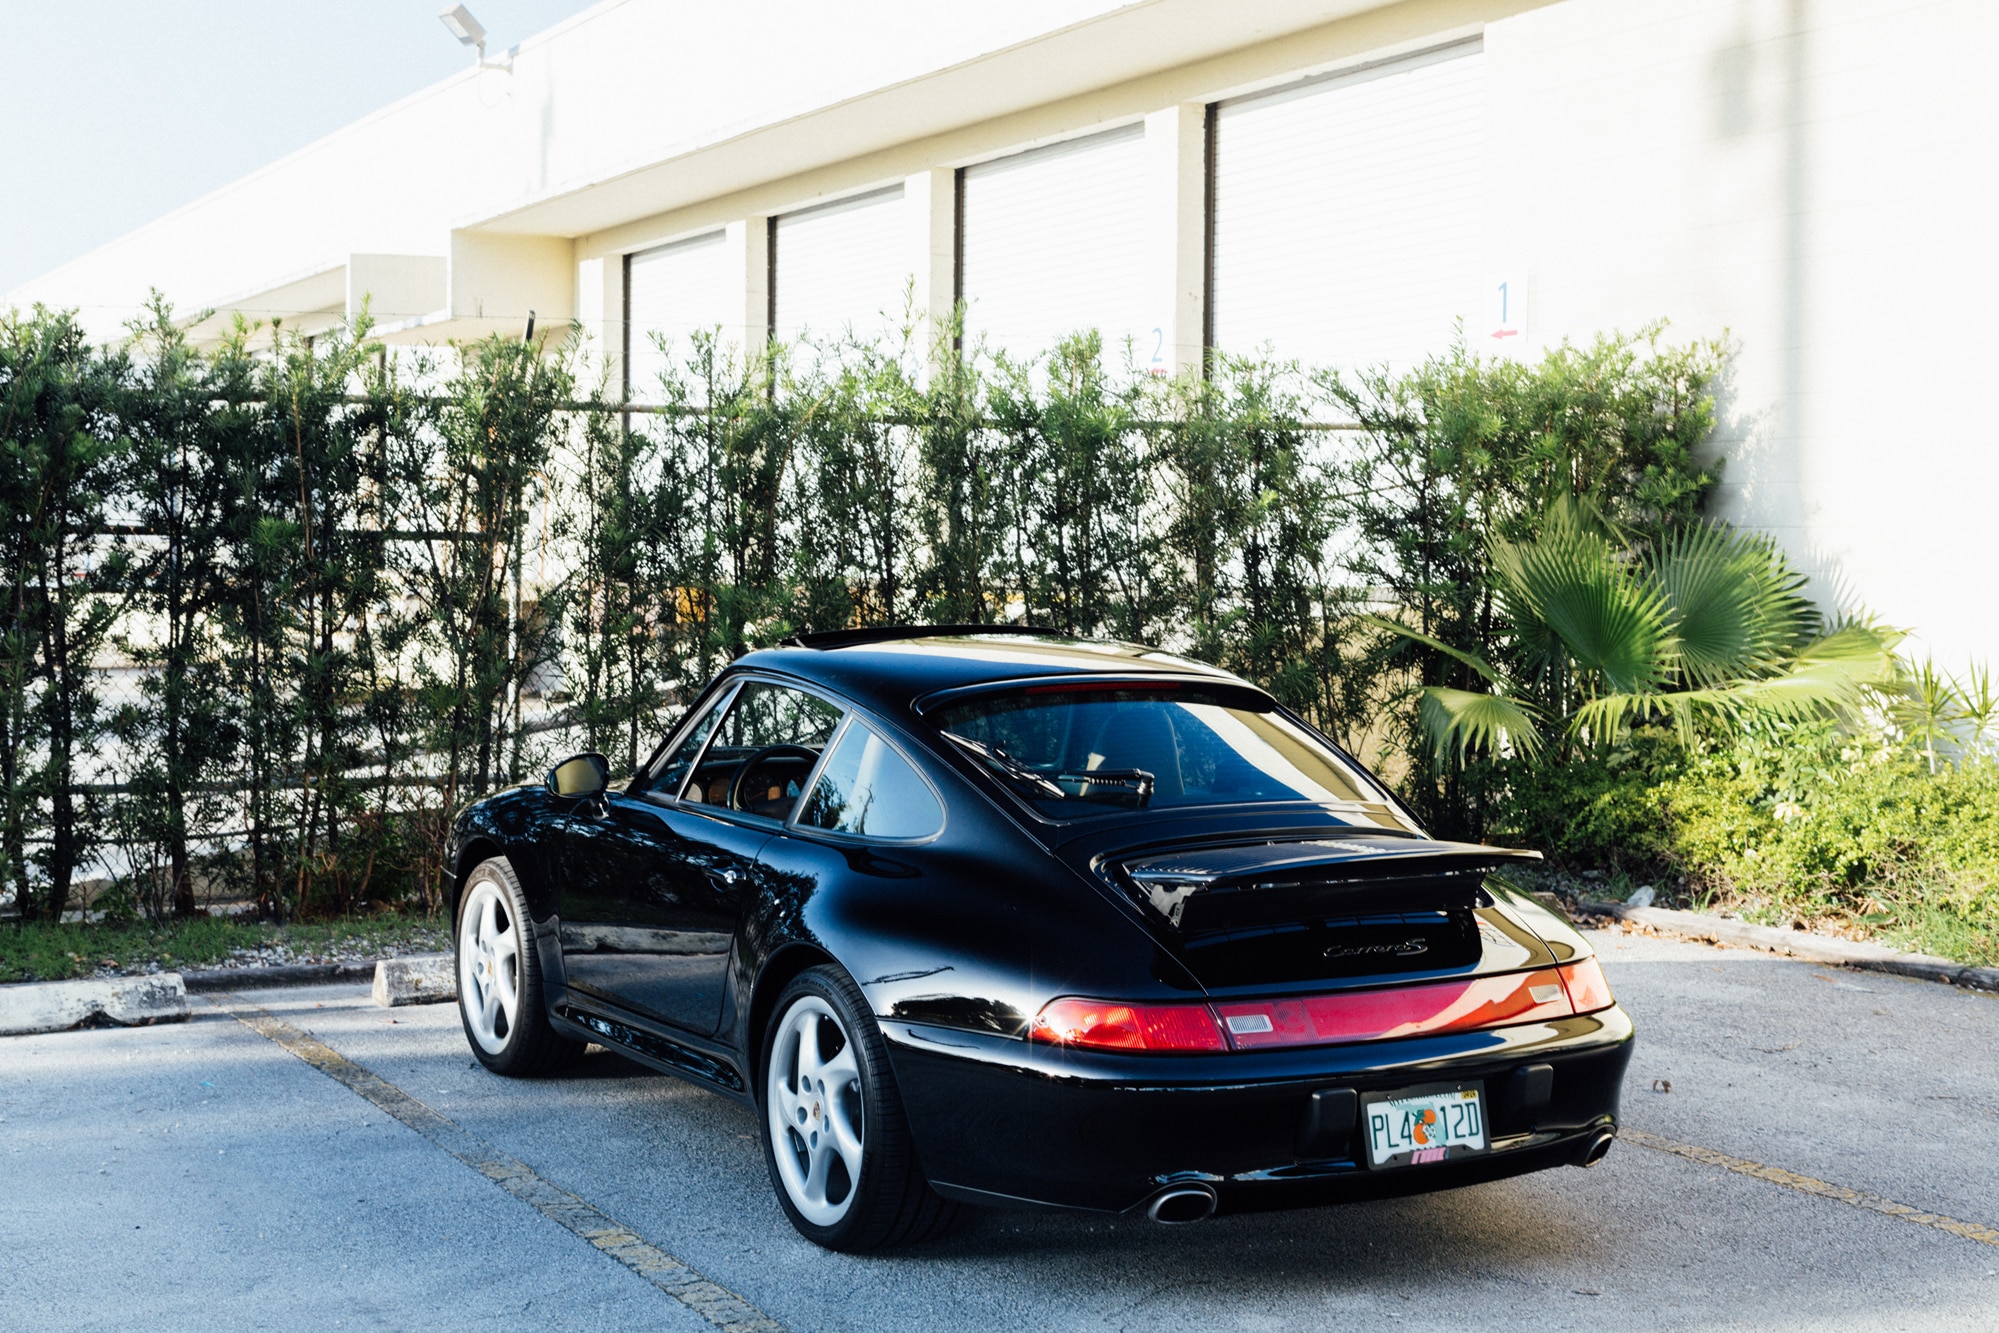 1998 Porsche 911 C2S (993) | Desirable Color Combination | 1 of 993 | Split Grill | 6 Speed Manual | Showroom Condition | Final Year of the Aircooled 911!